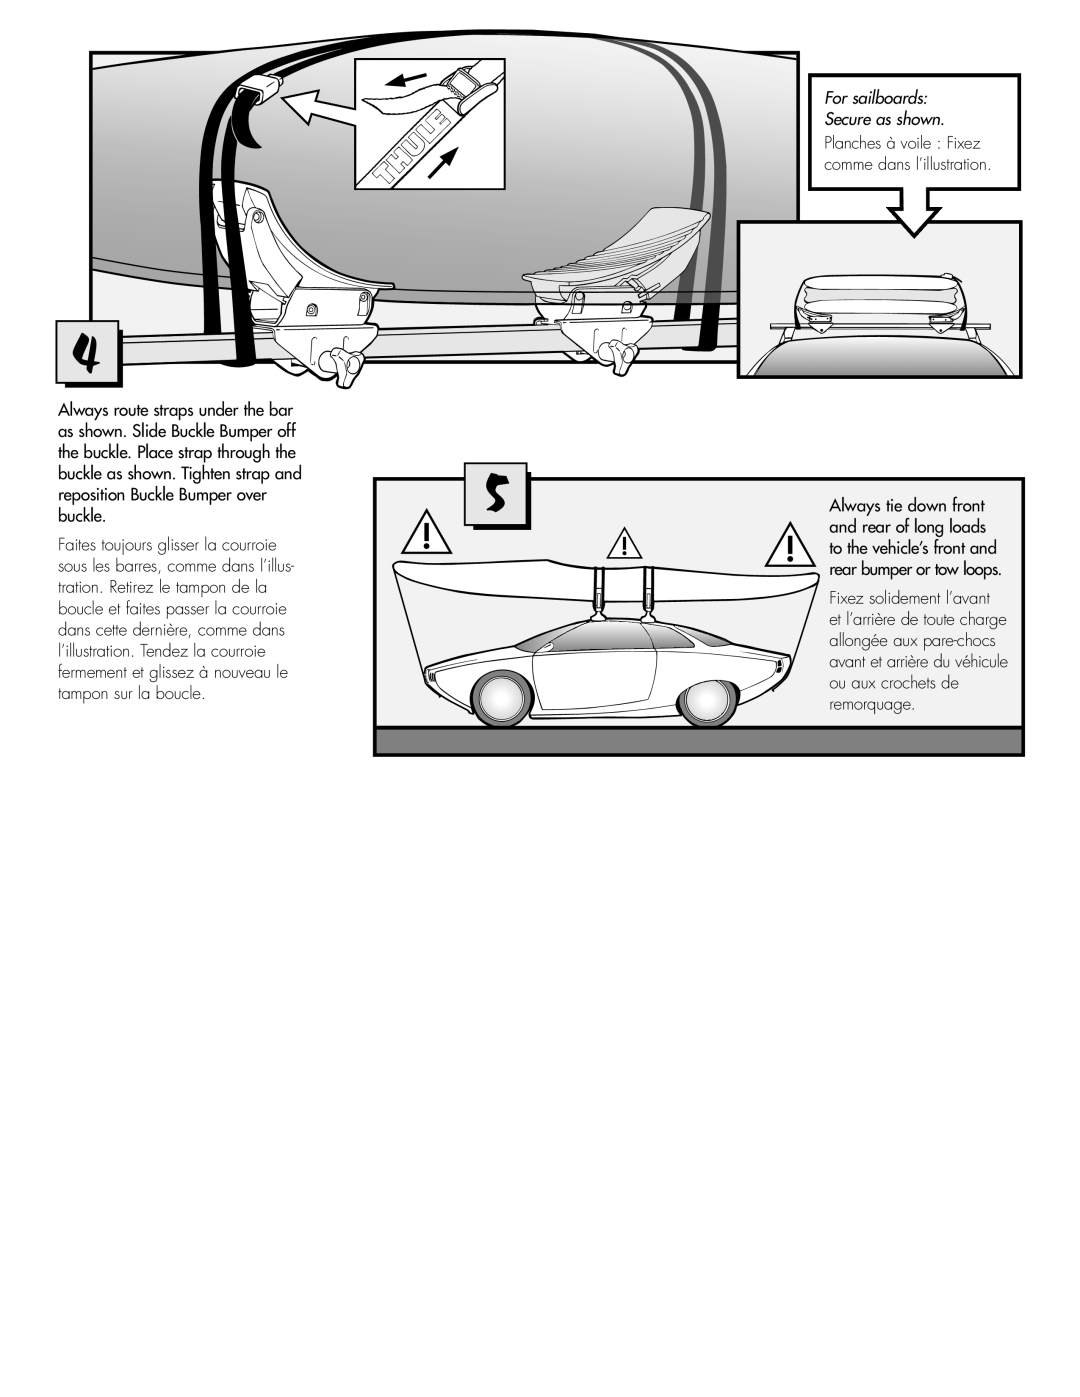 Thule 876 installation instructions For sailboards Secure as shown 